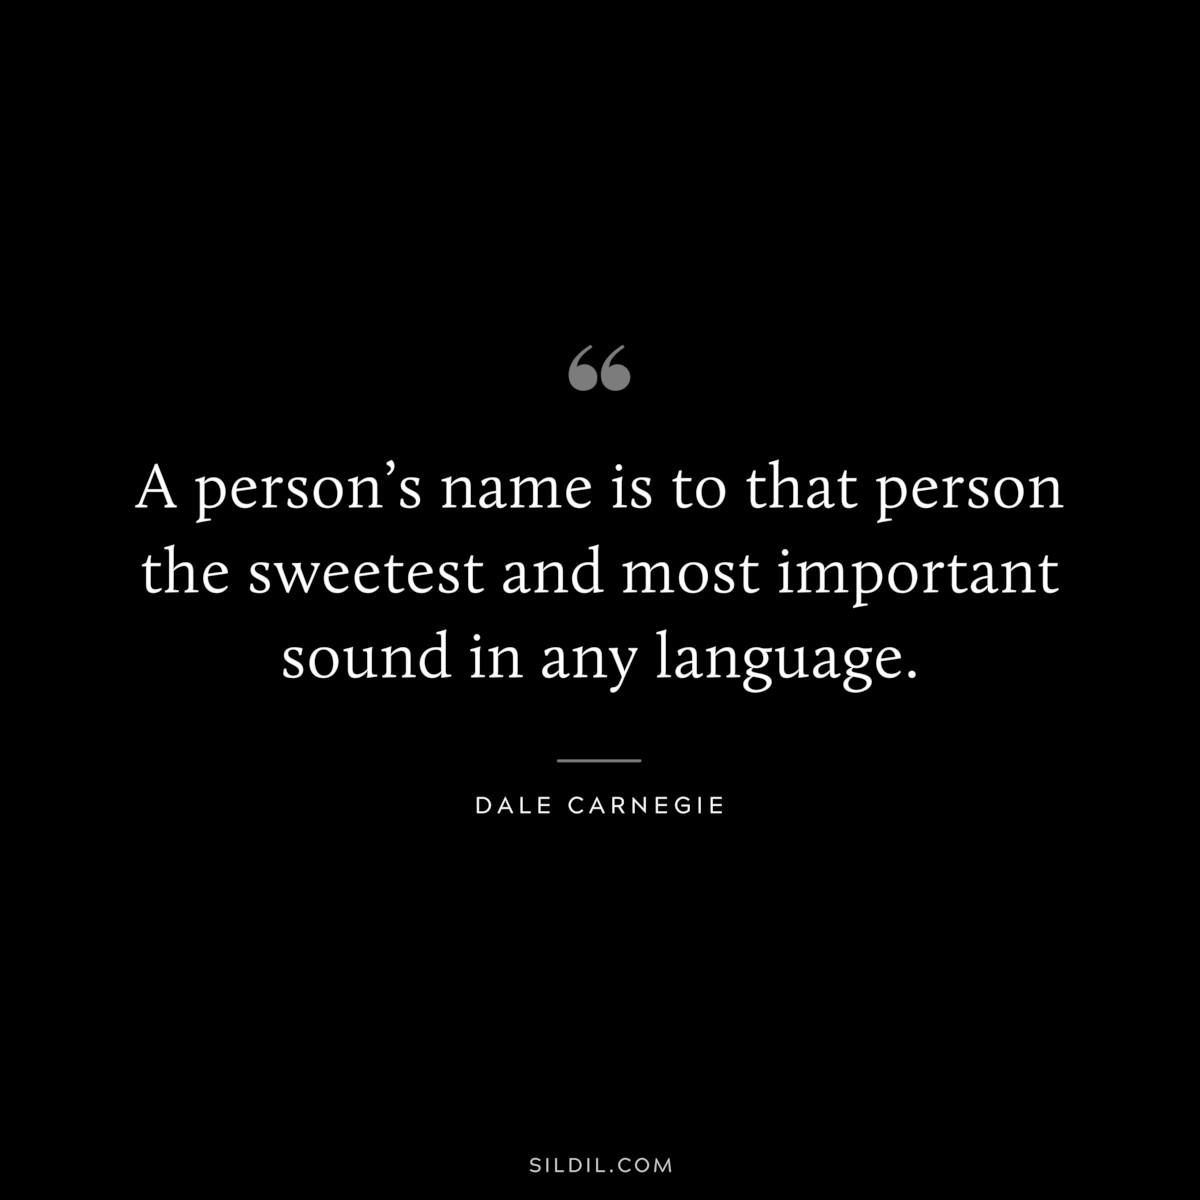 A person’s name is to that person the sweetest and most important sound in any language.― Dale Carnegie